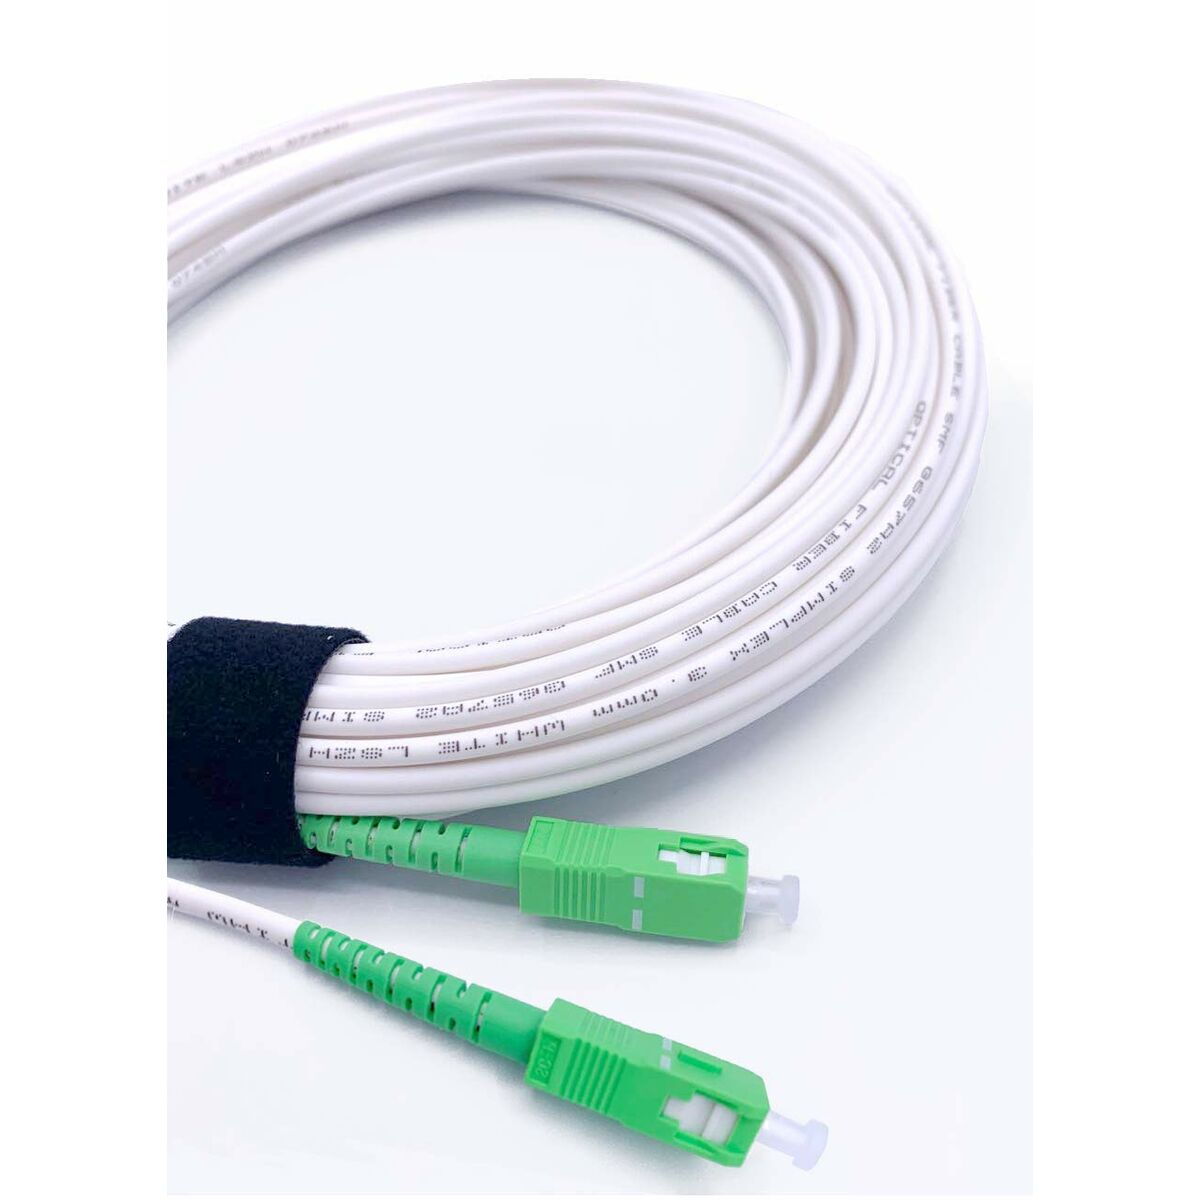 Fibre optic cable High speed White (Refurbished B)